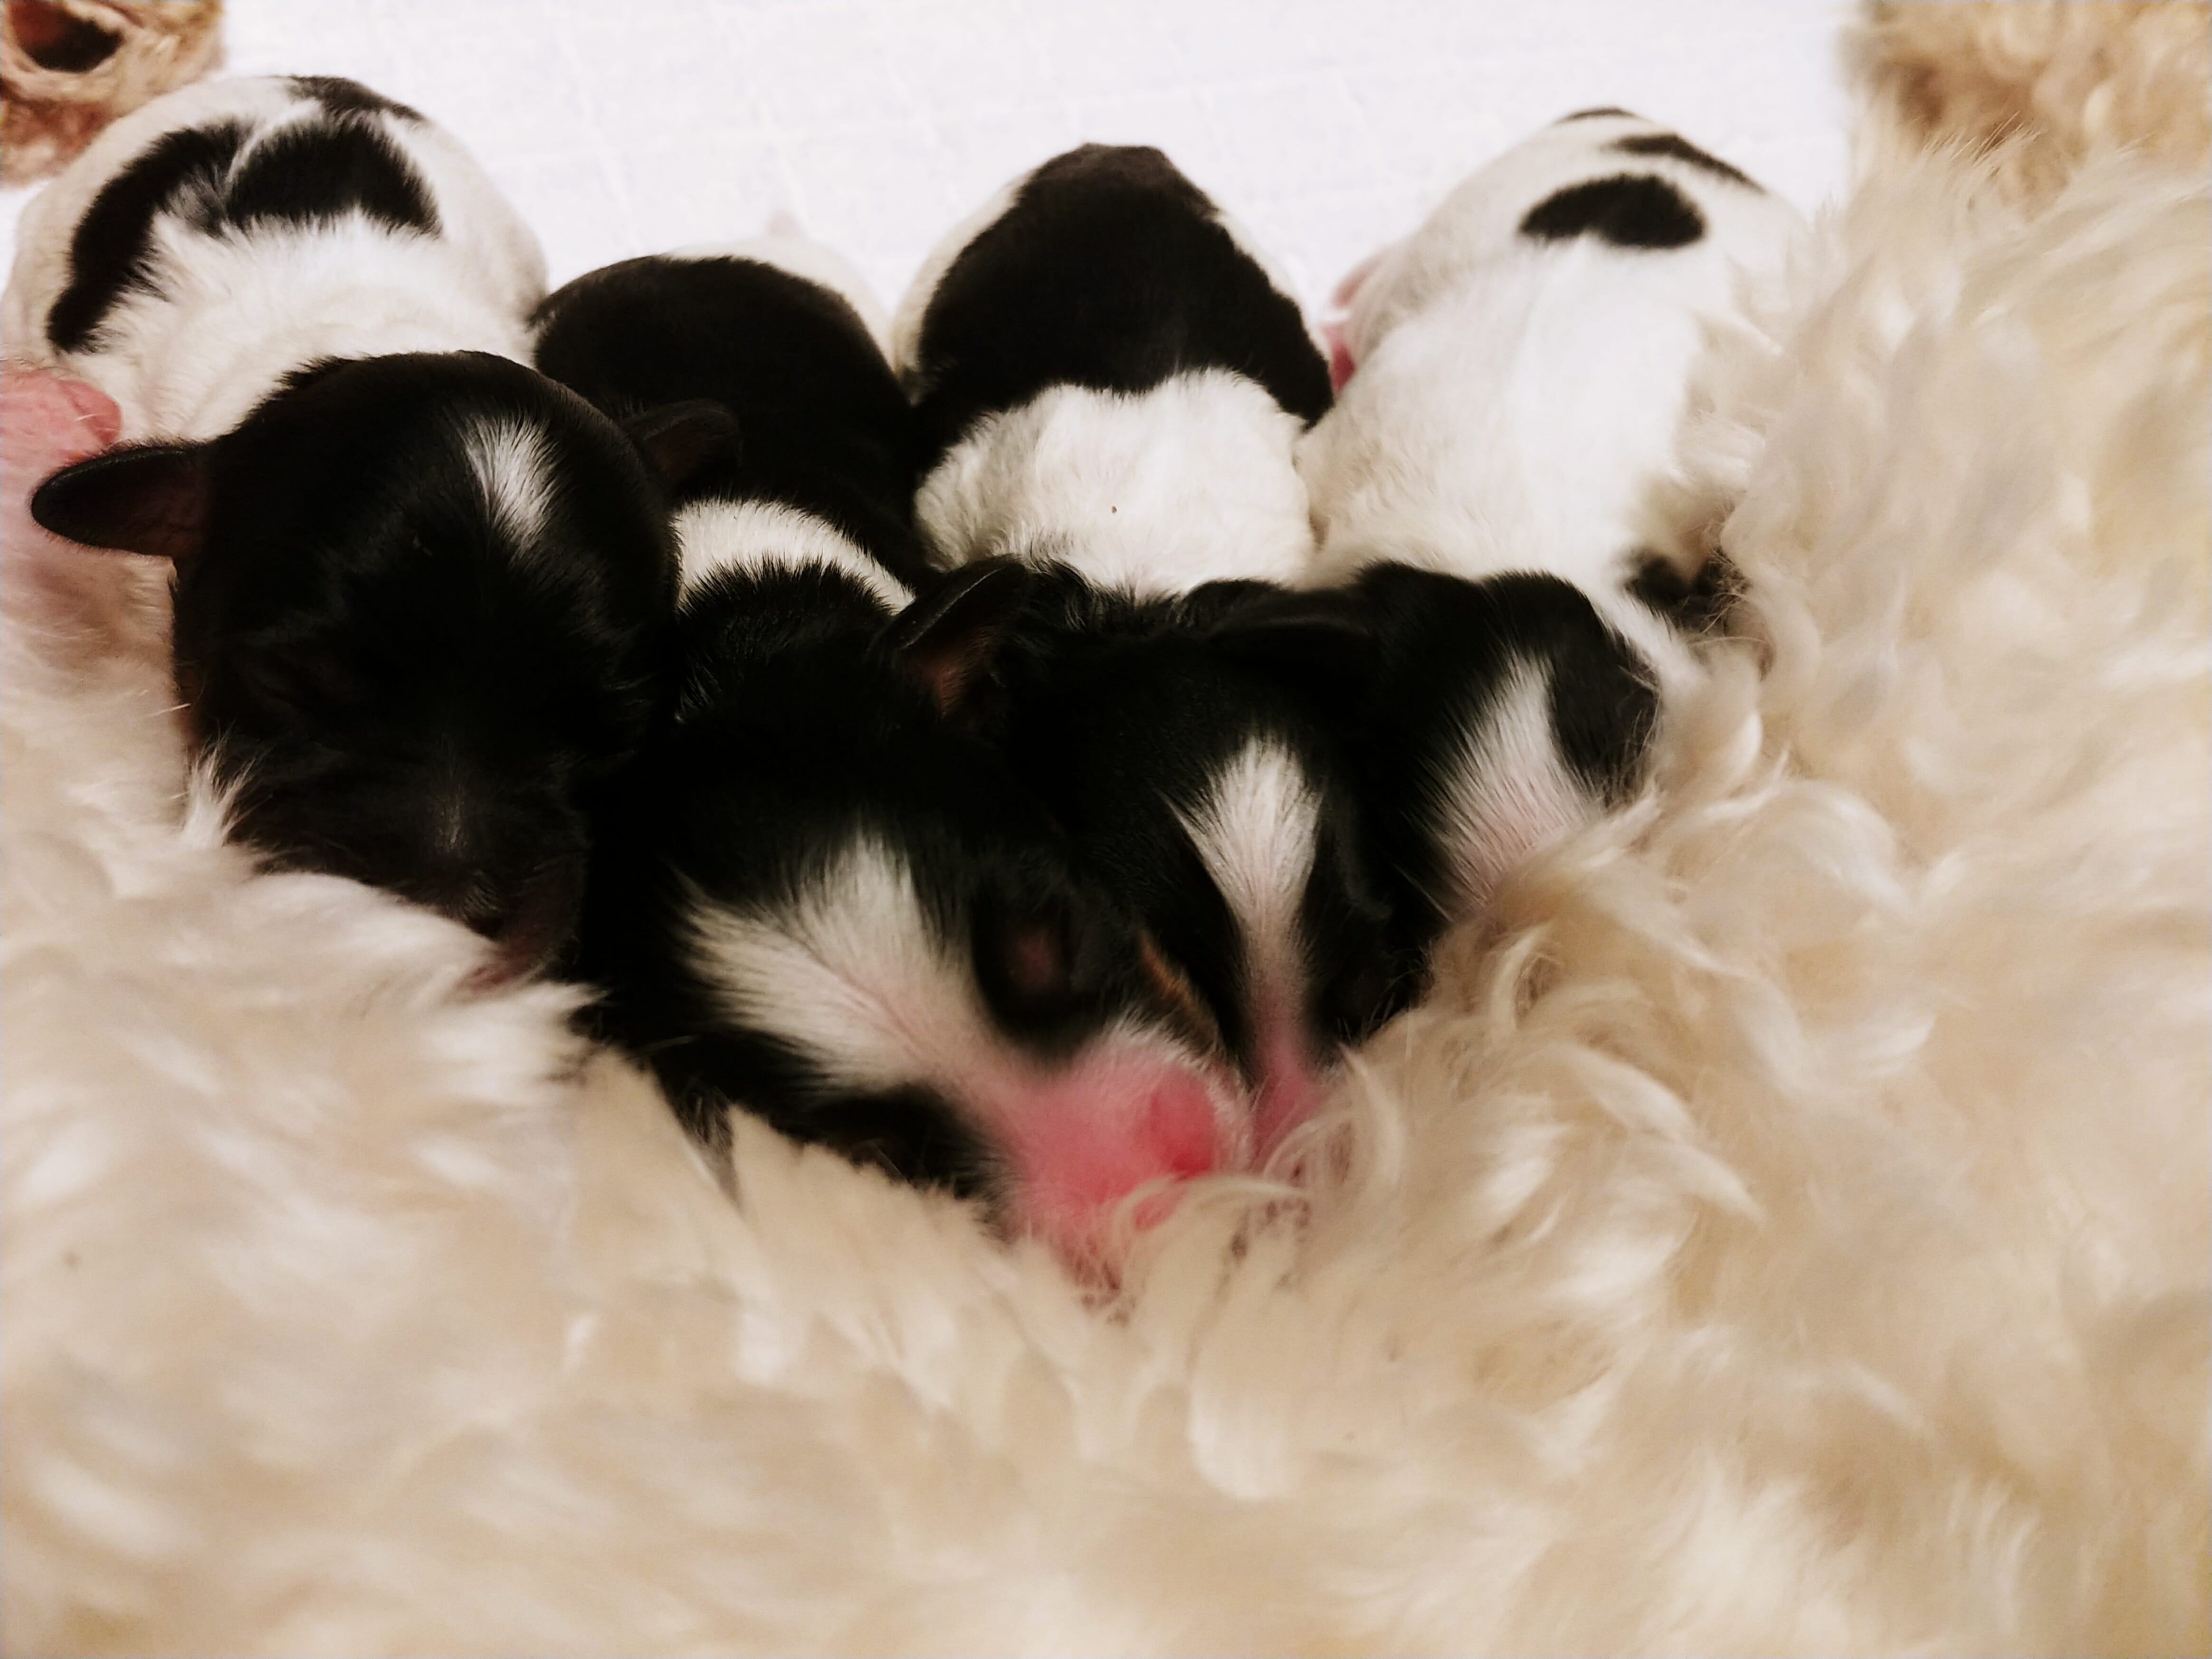 Image of 4 newborn parti pattern labradoodle puppies (white and black) they are snuggled together facing the camera and resting against the belly of their mom. One pink nose is centered in the image.